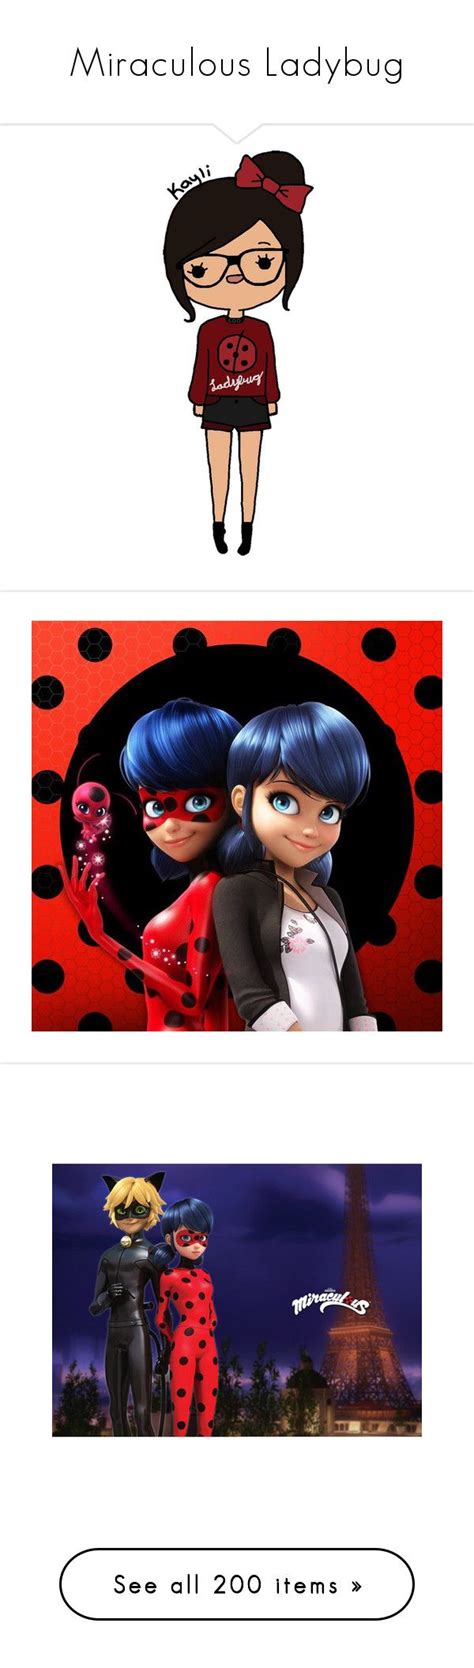 Miraculous Ladybug By Lalalasprinkles Liked On Polyvore Featuring